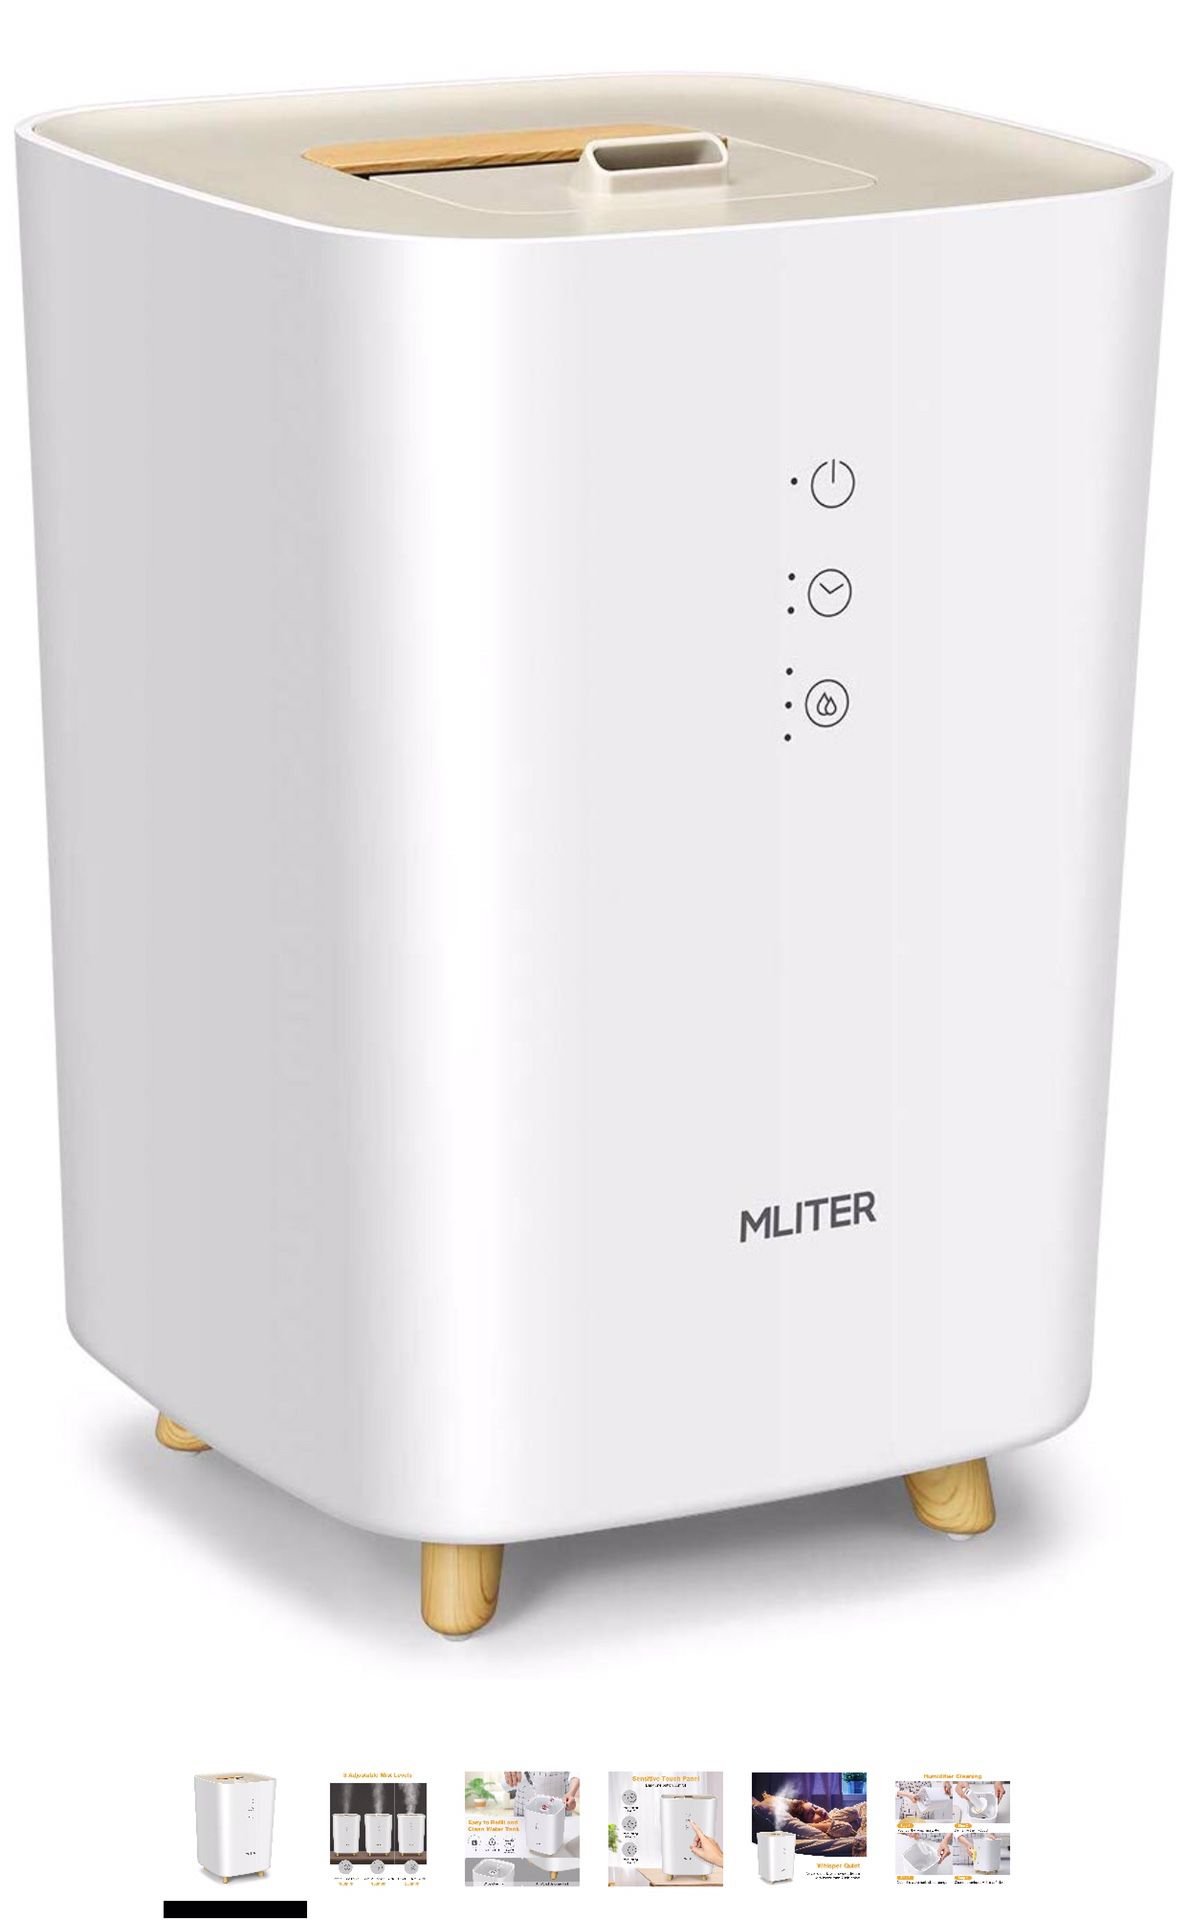 MLITER Ultrasonic Cool Mist Humidifier, Superior Top Fill Humidifying Diffuser with 2.5L, Timer and 3 Adjustable Mist, Auto Shut-Off, Whisper-Quiet O